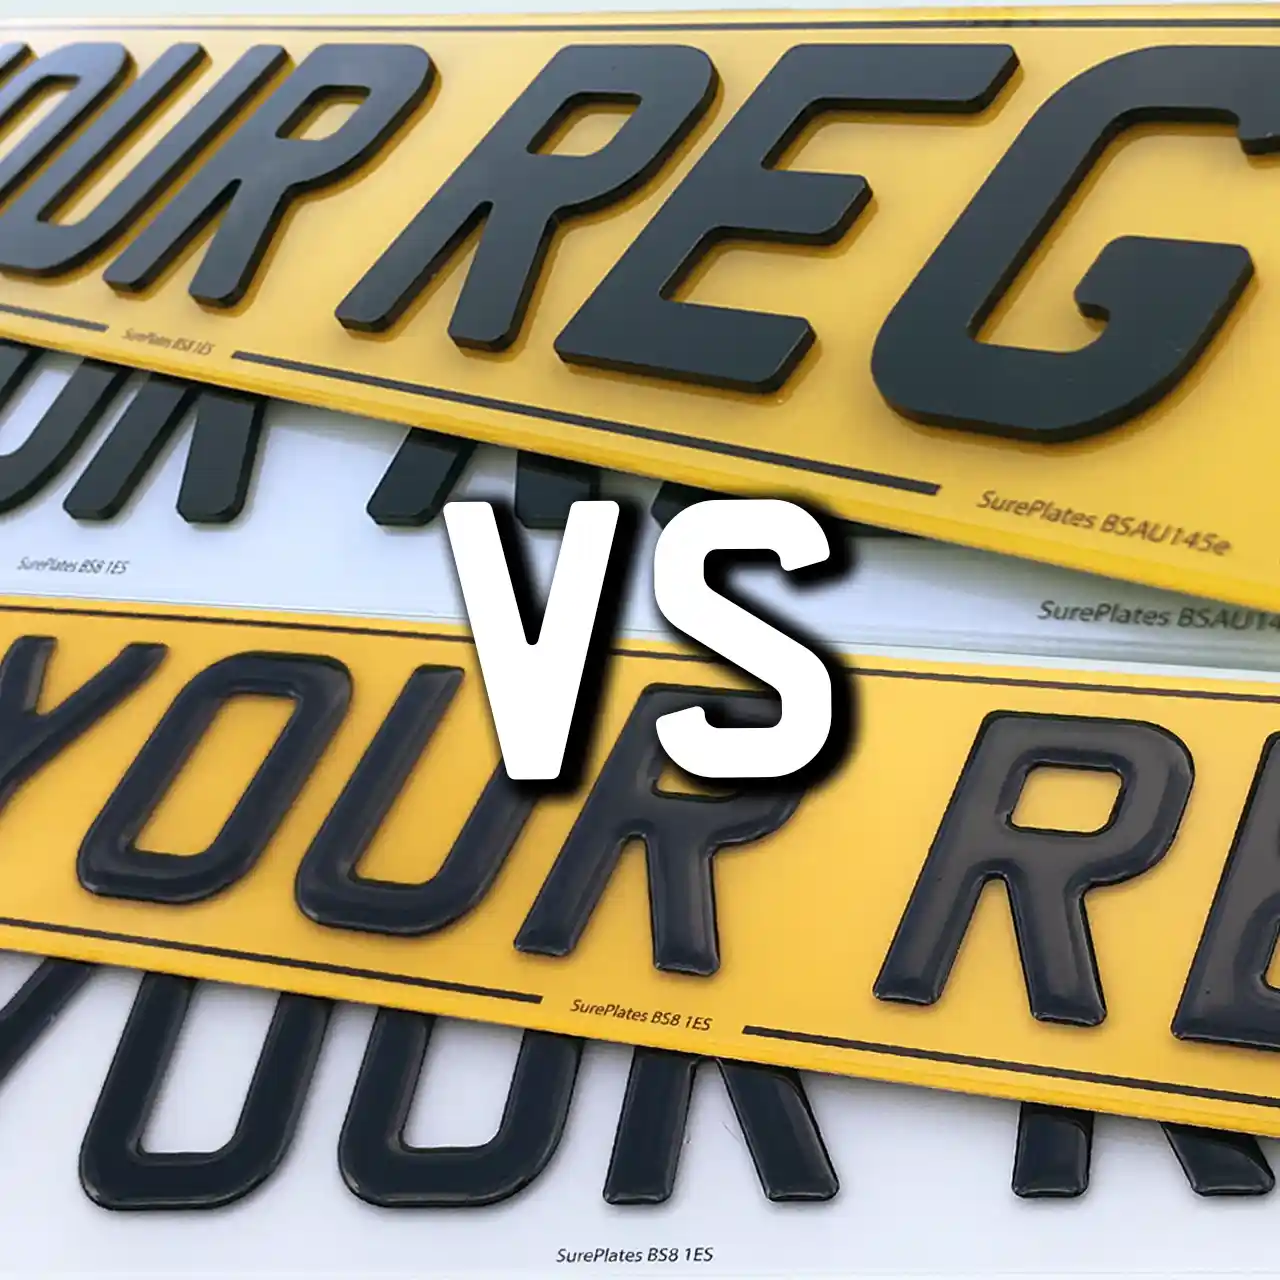 SurePlates 4D Number Plates vs Gel Number Plates Which Style Offers Better Durability copy